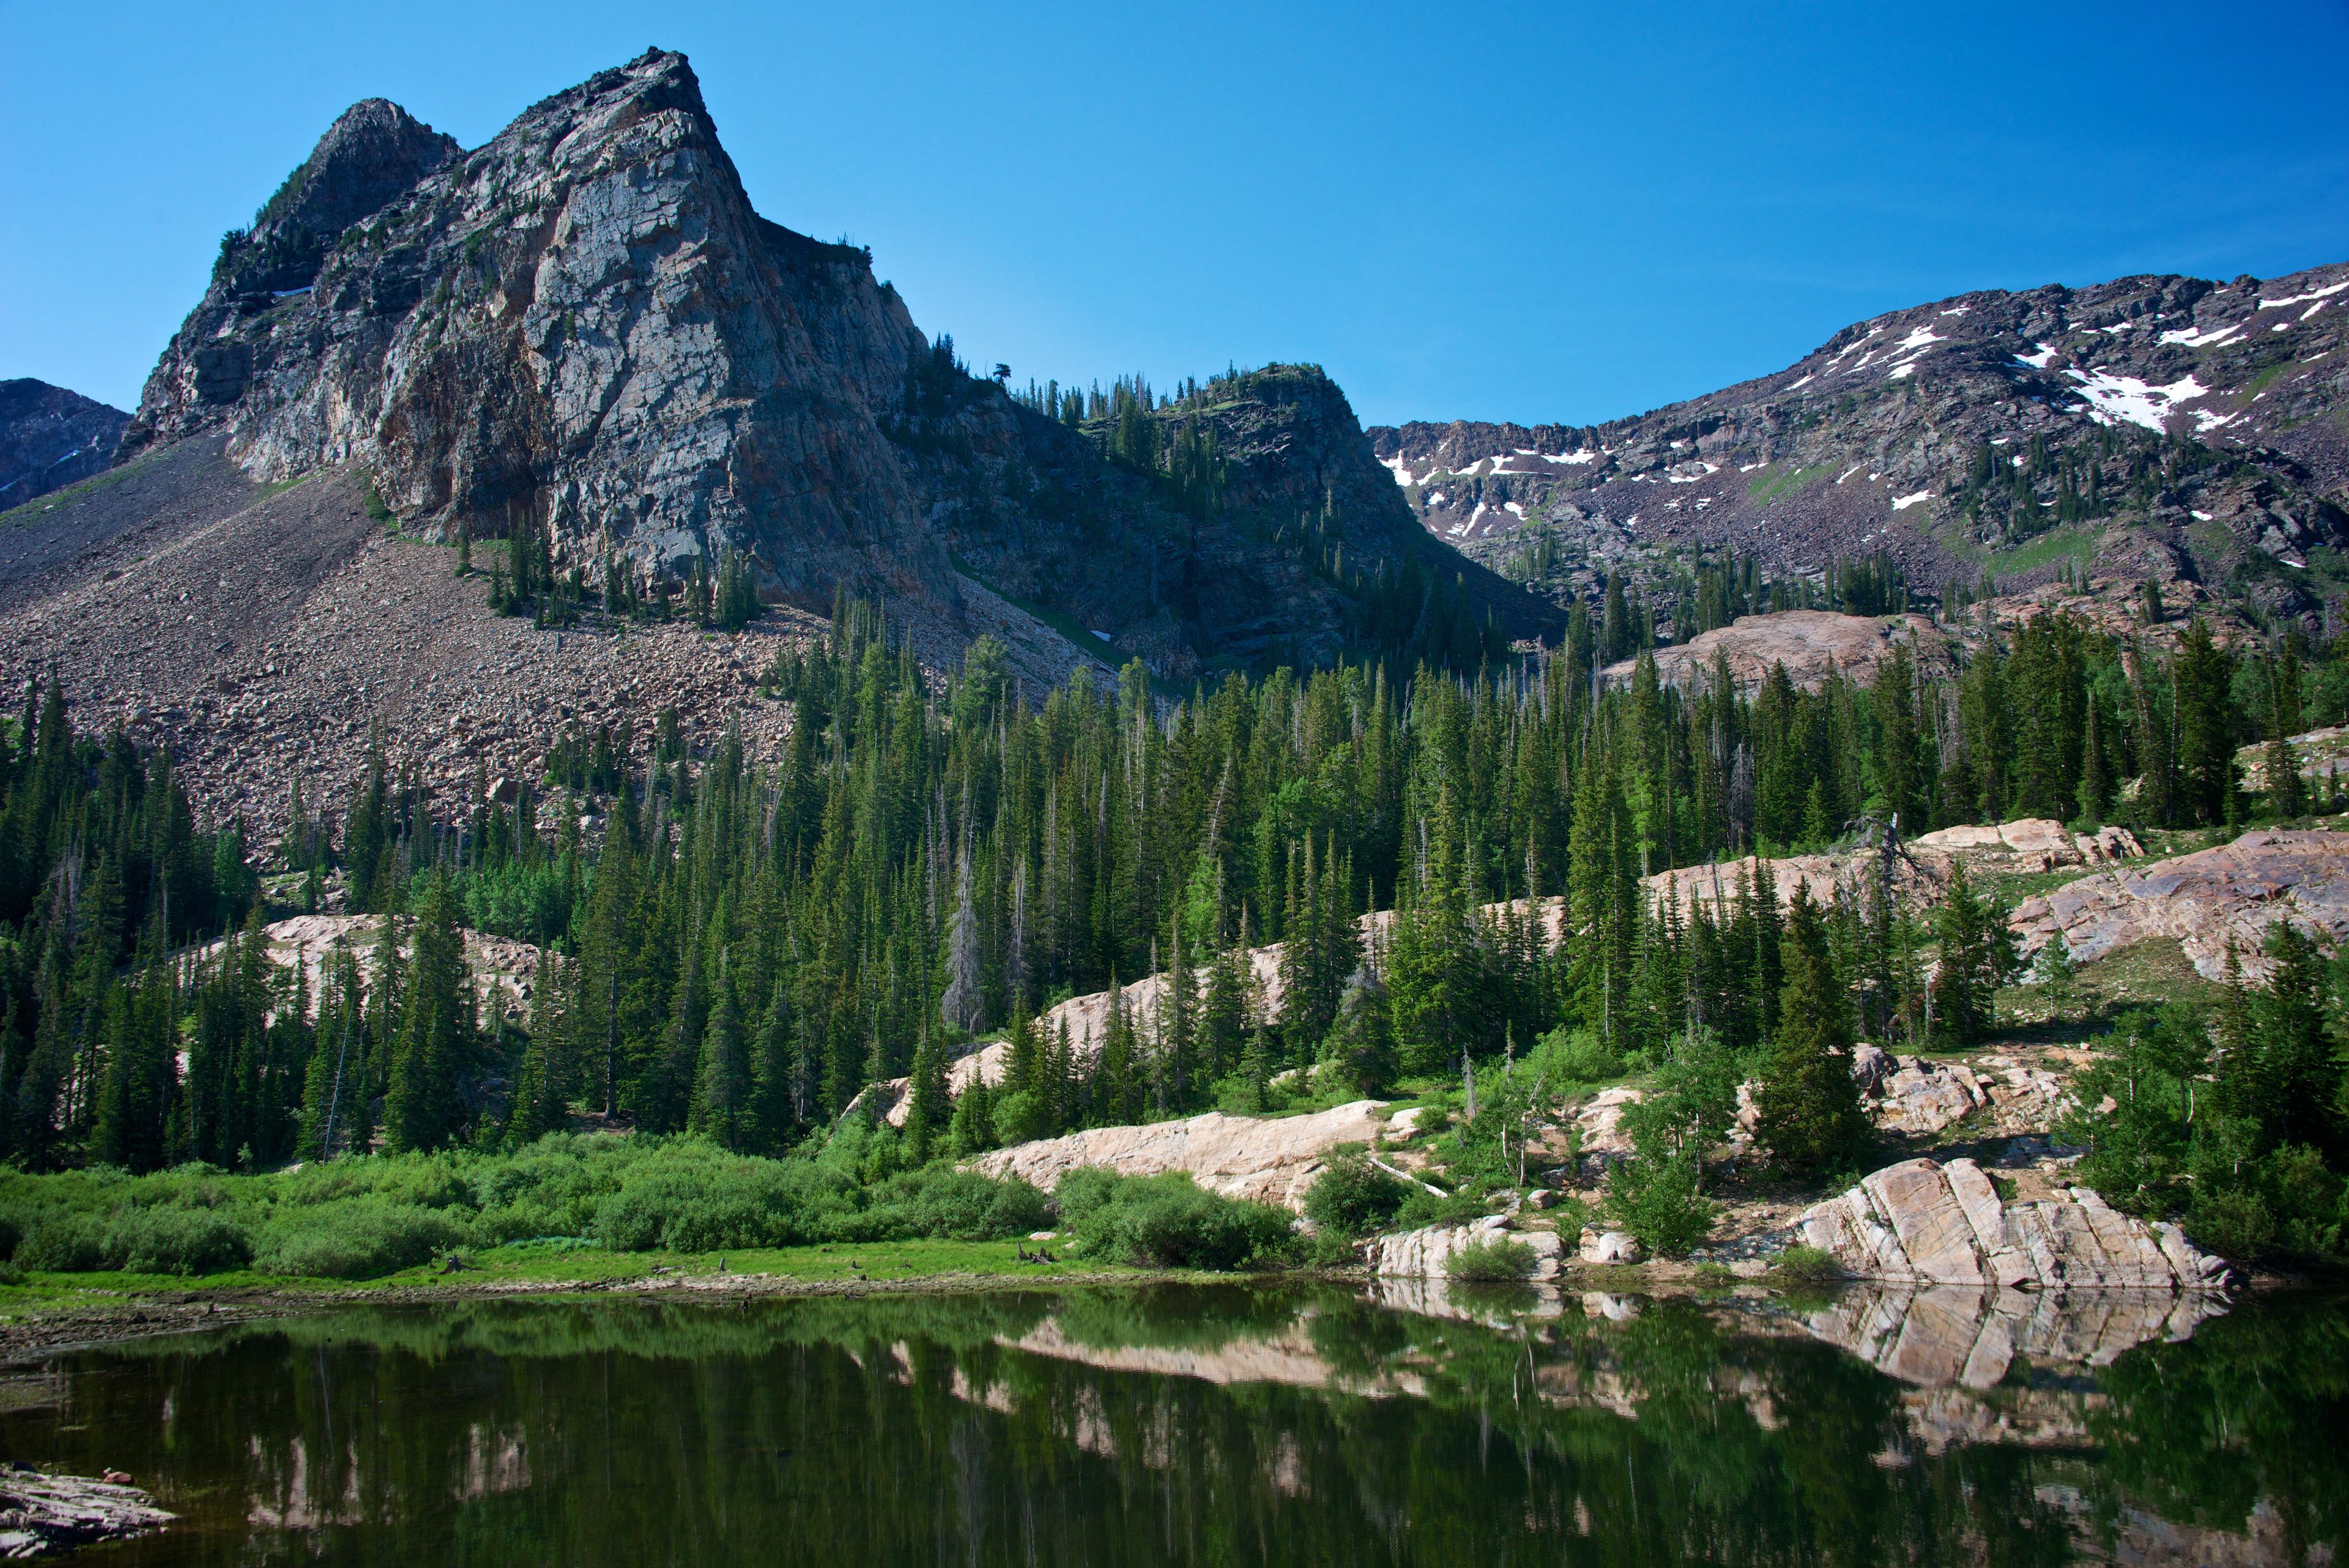 A landscape image of Little Cottonwood Canyon and Lake Blanche in Utah.